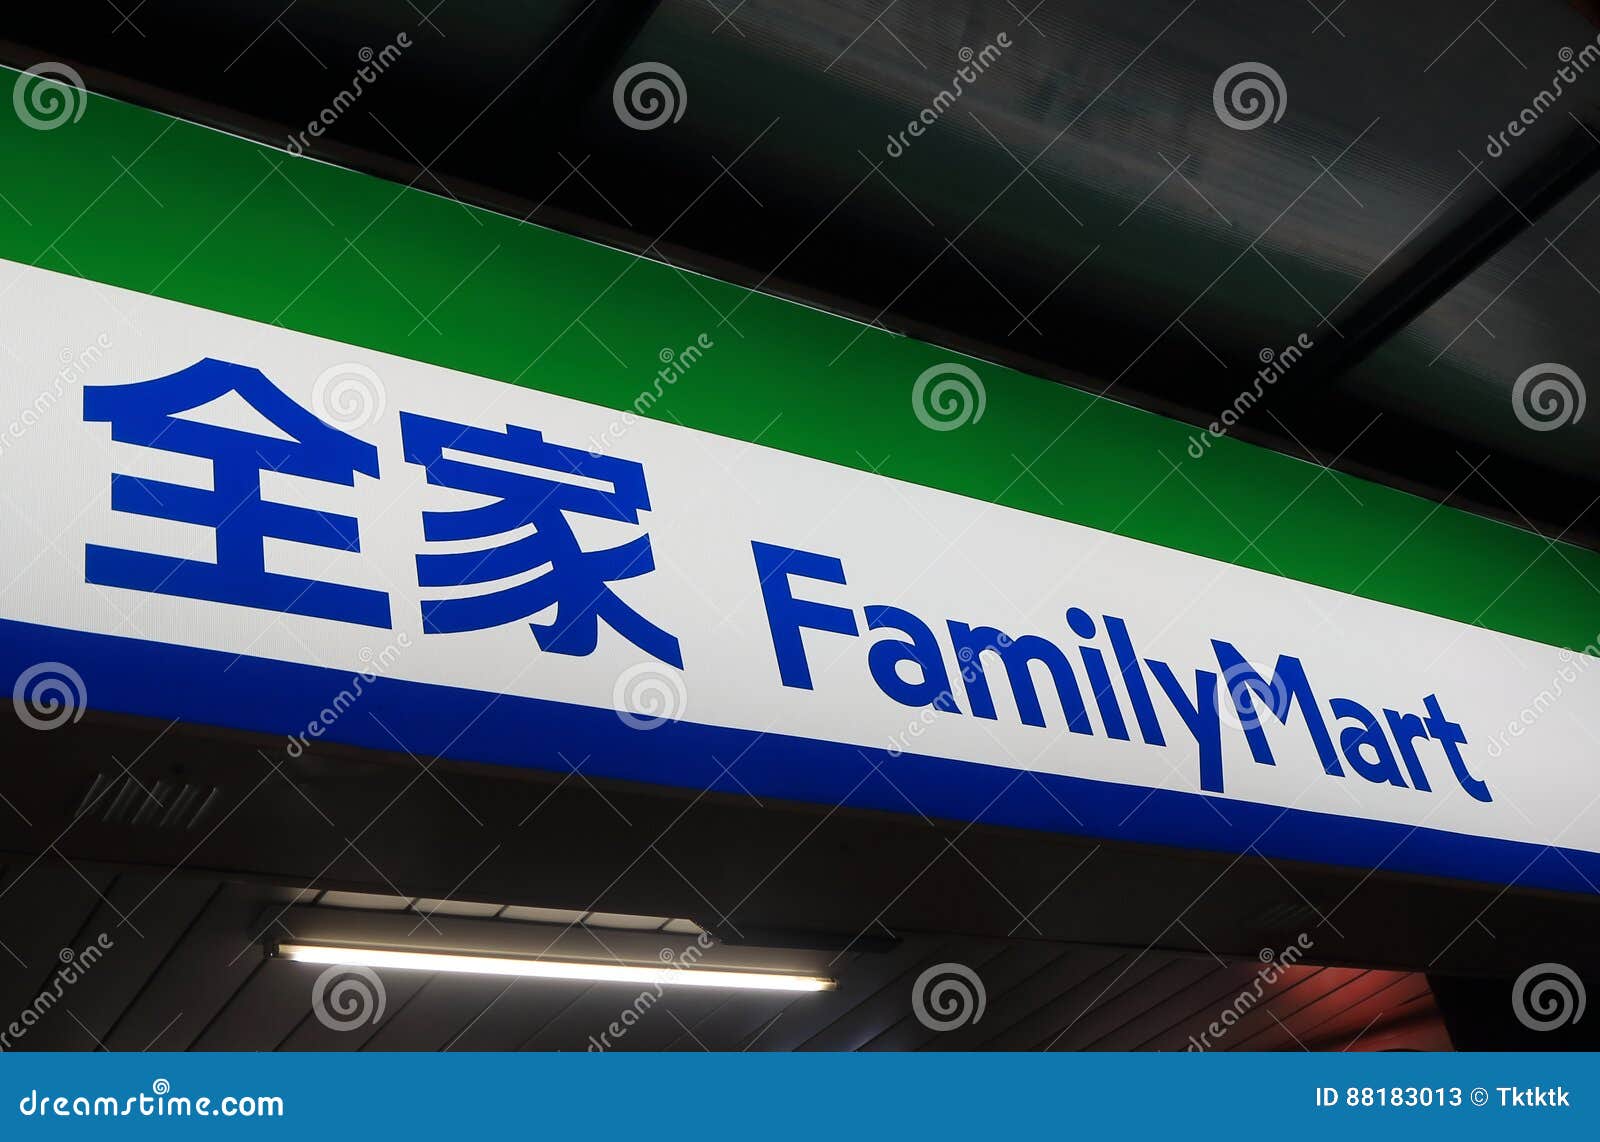 Family mart operating hours